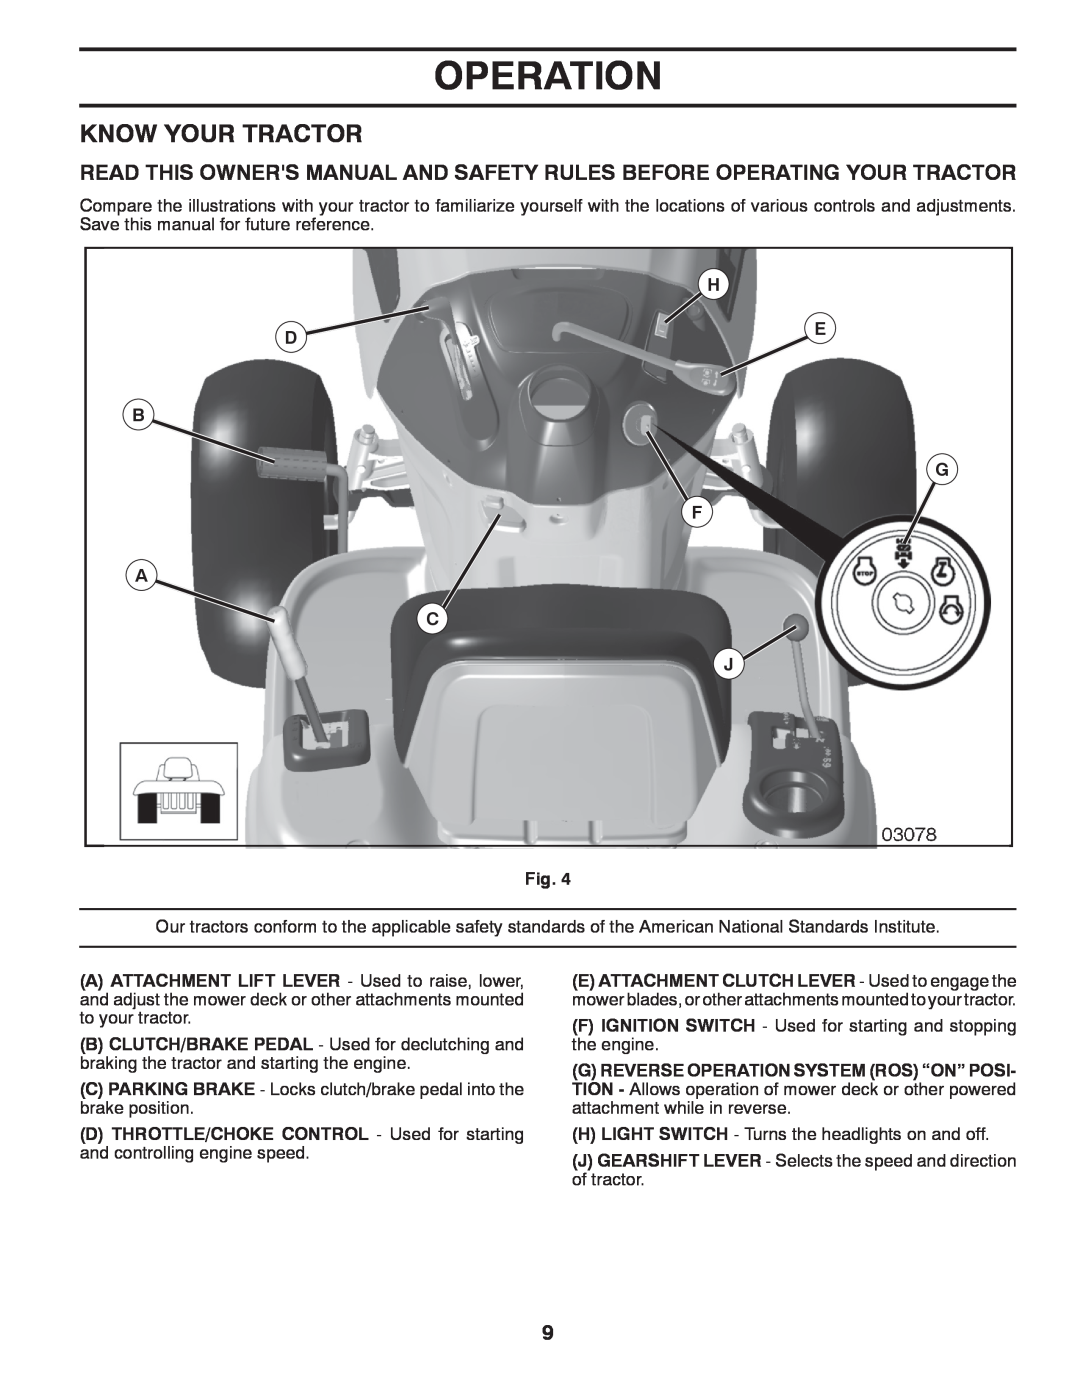 McCulloch M12530, 96041017600, 532 43 44-99 manual Know Your Tractor, Operation, H D E, G F A C J Fig 